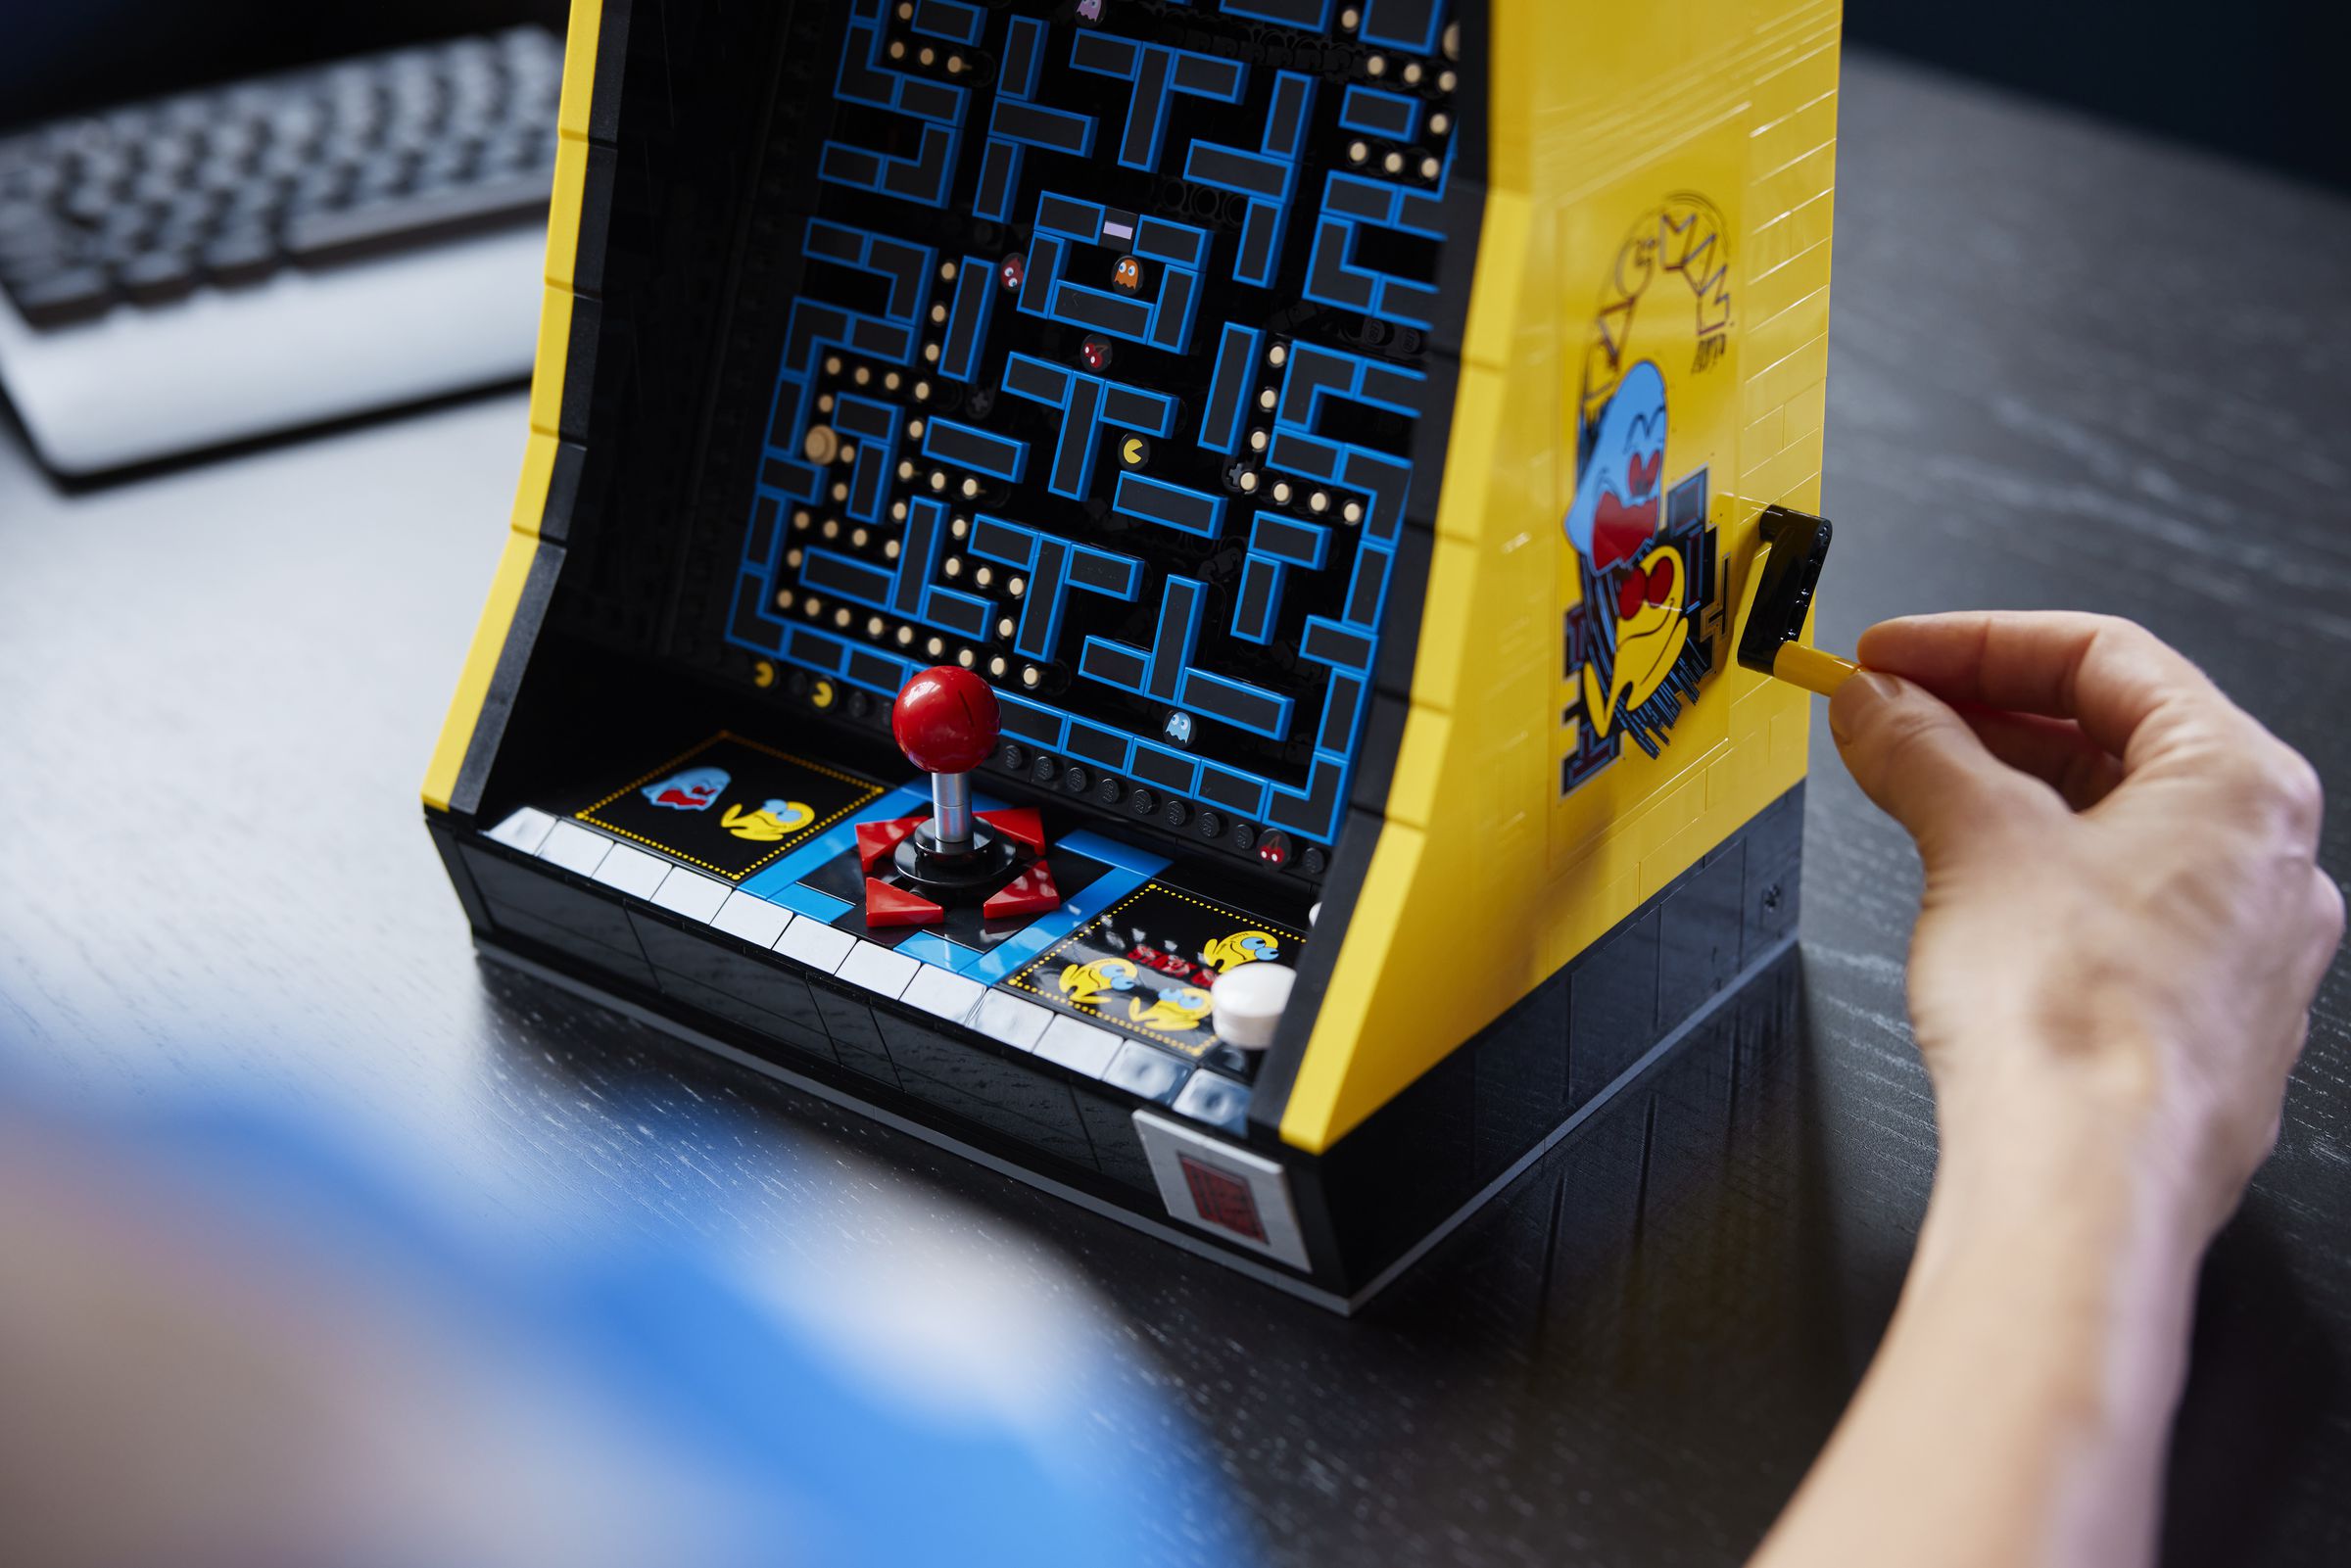 A person turns the crank on the side of the lego arcade cabinet.